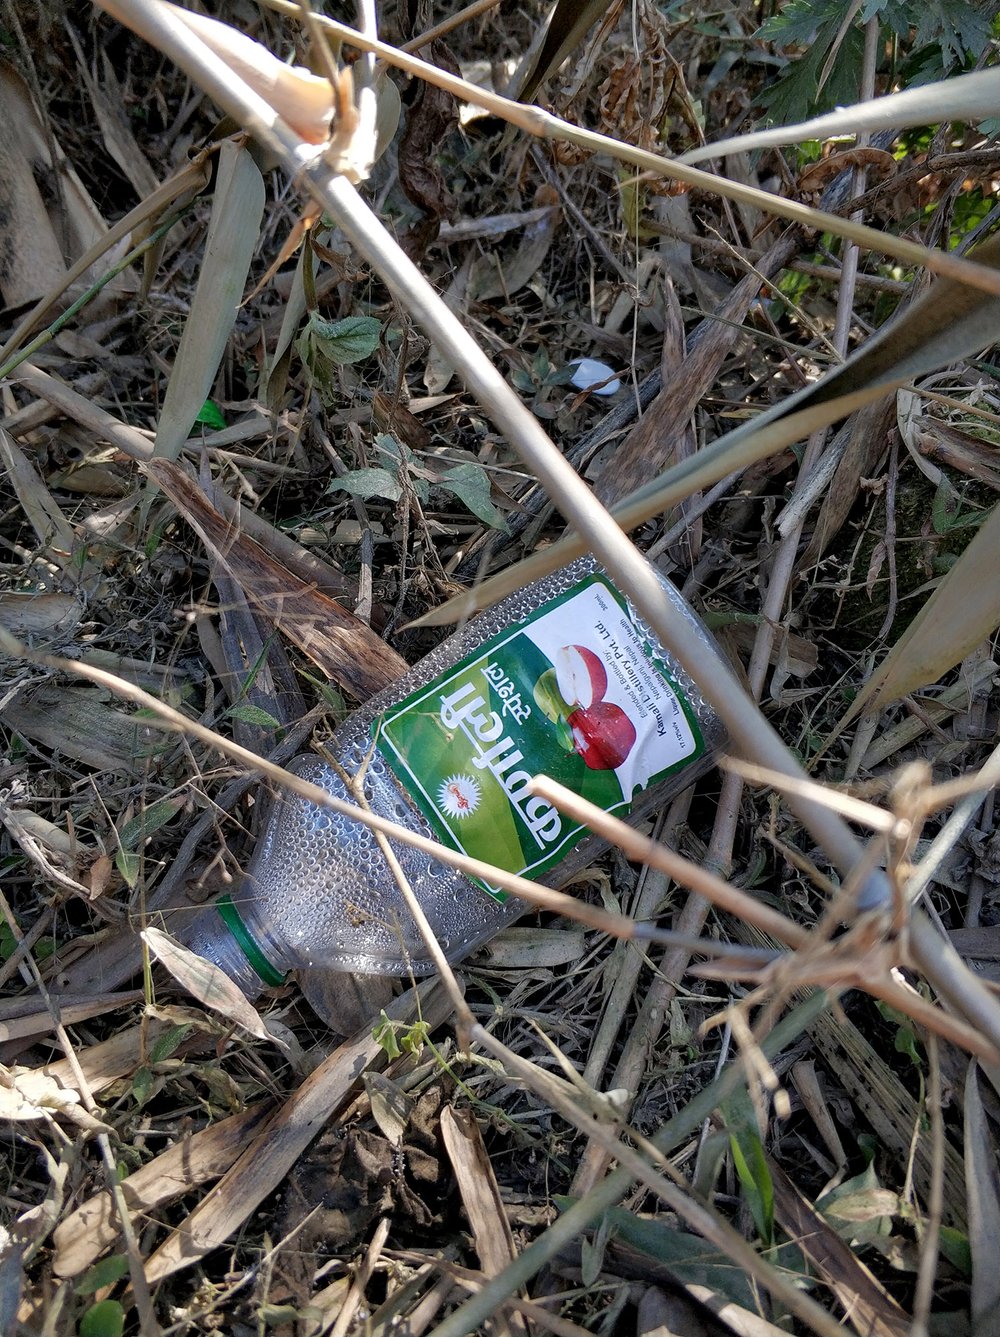  …looks like some folks recently had a little roadside party right here. And we just learned that apple schnapps not only exists in Nepal, but is even mass produced. 